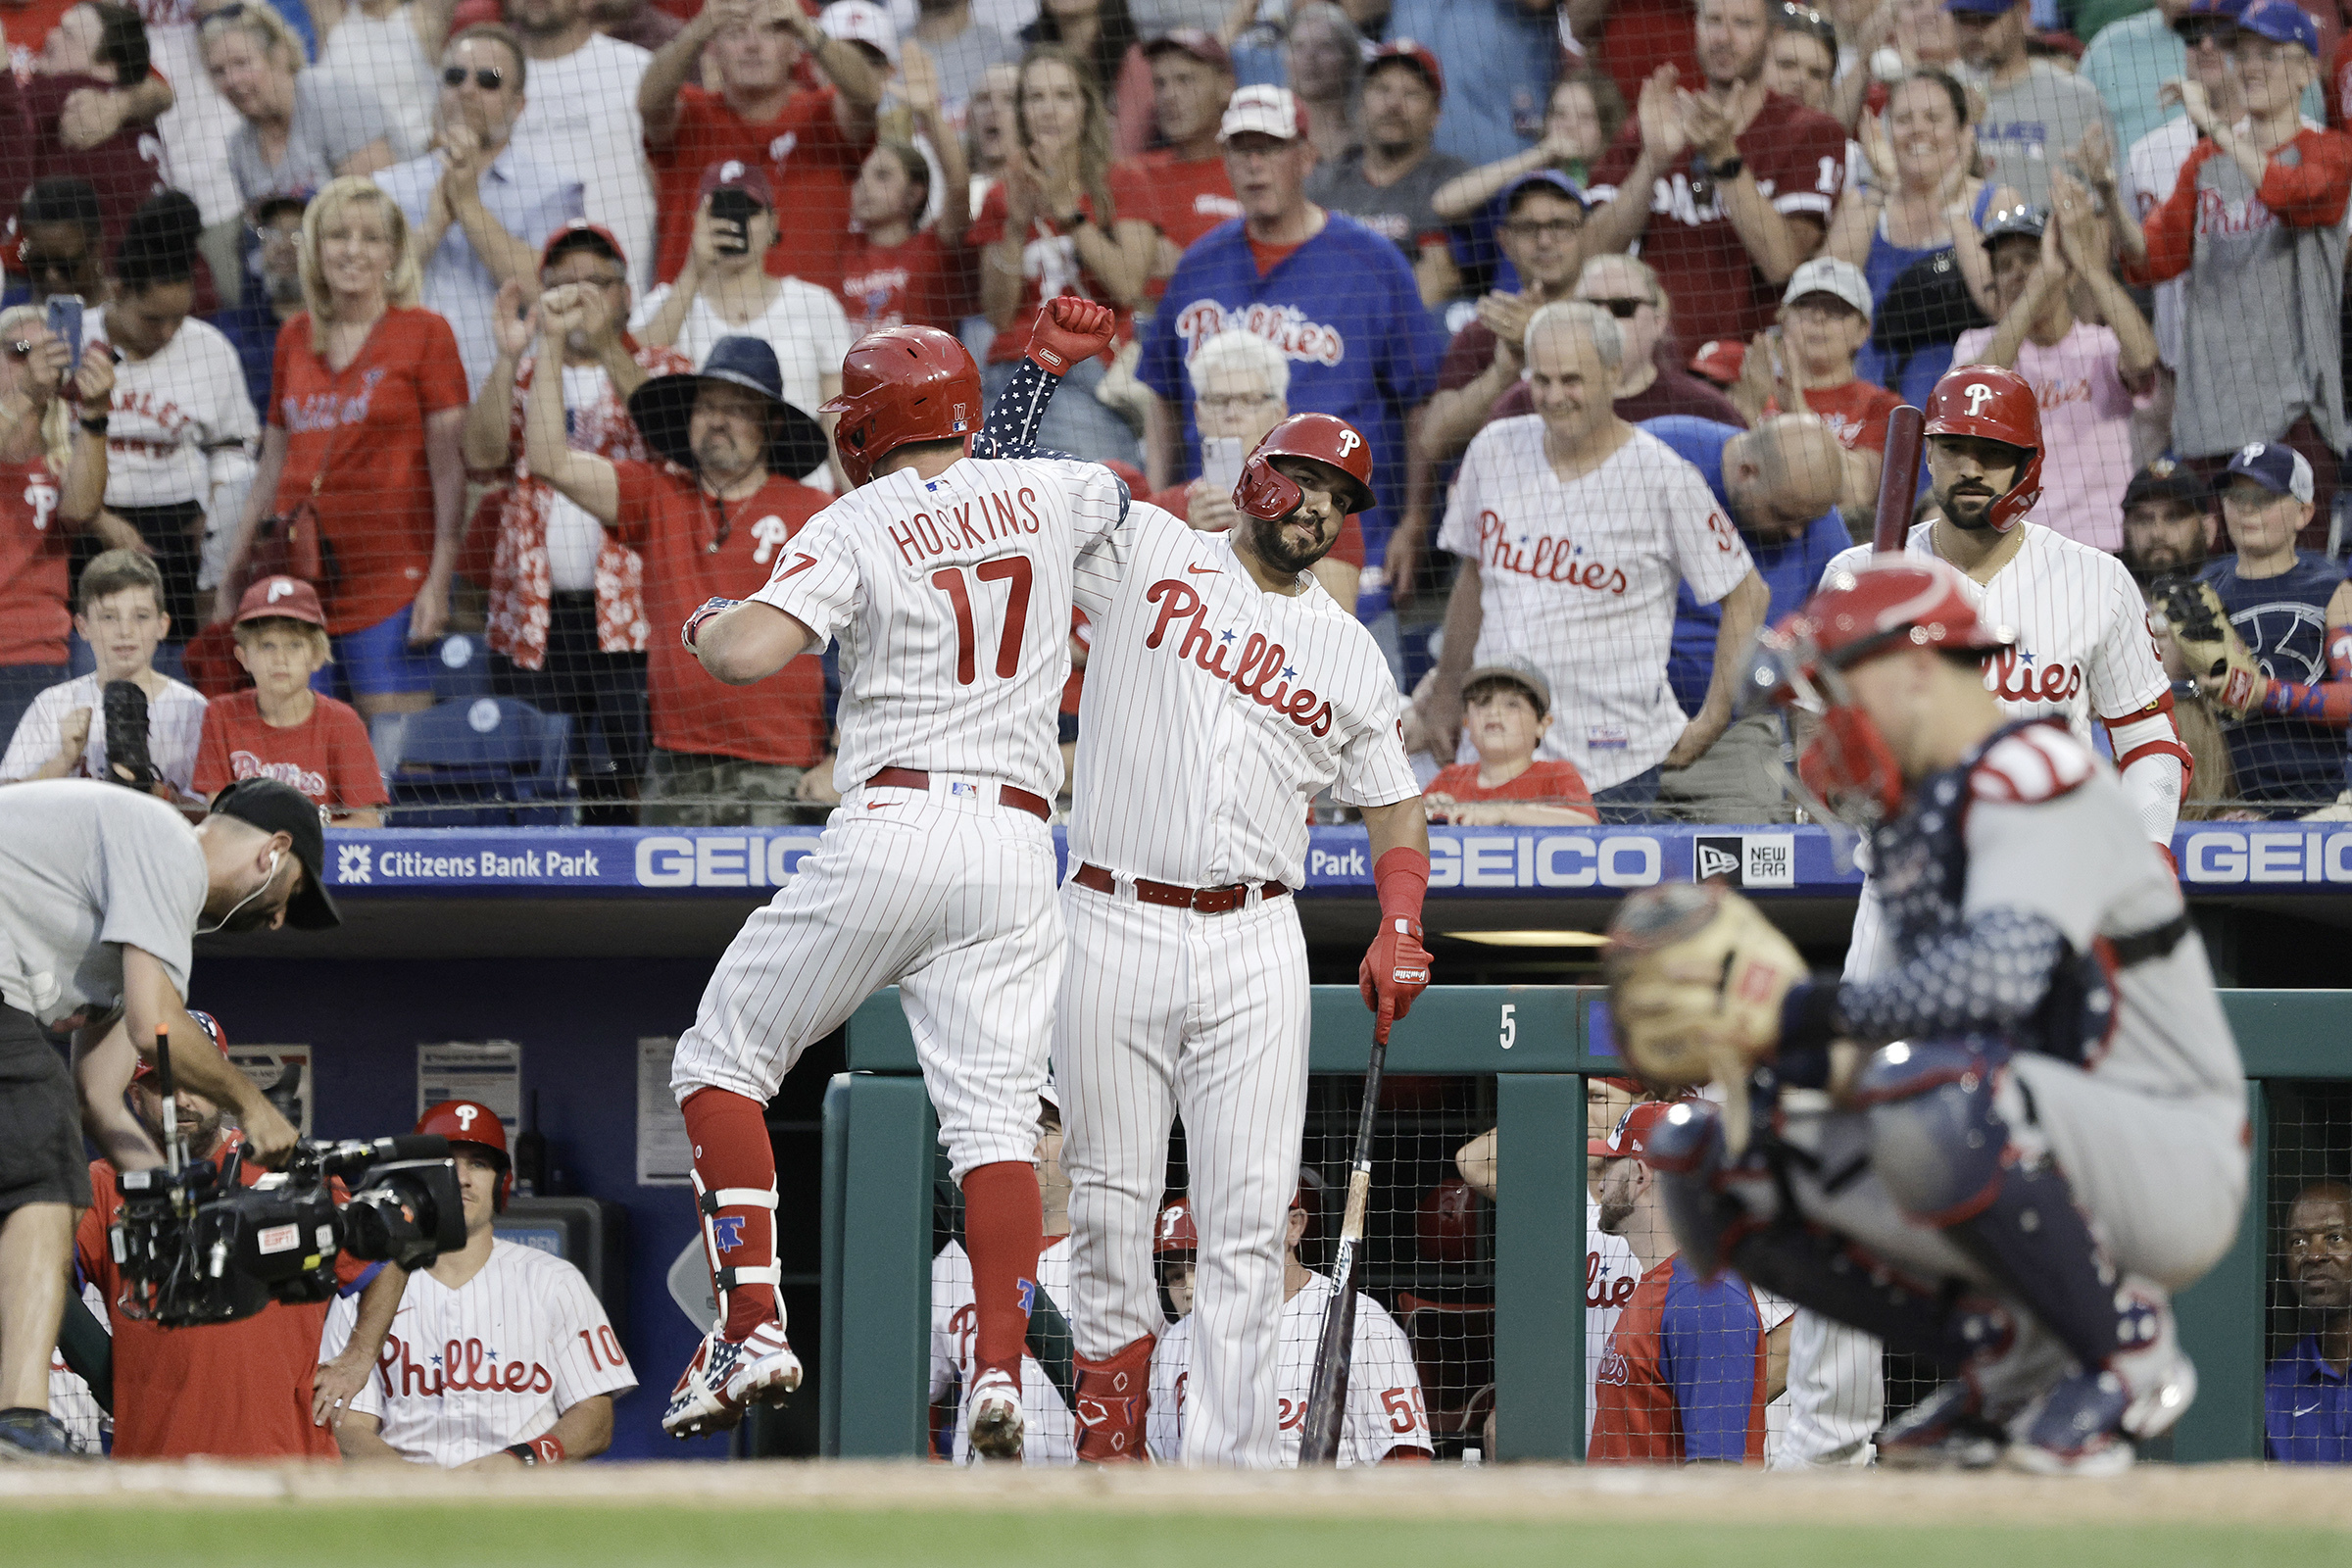 MLB Wild Card: Phillies lose to Braves, miss chance to gain ground